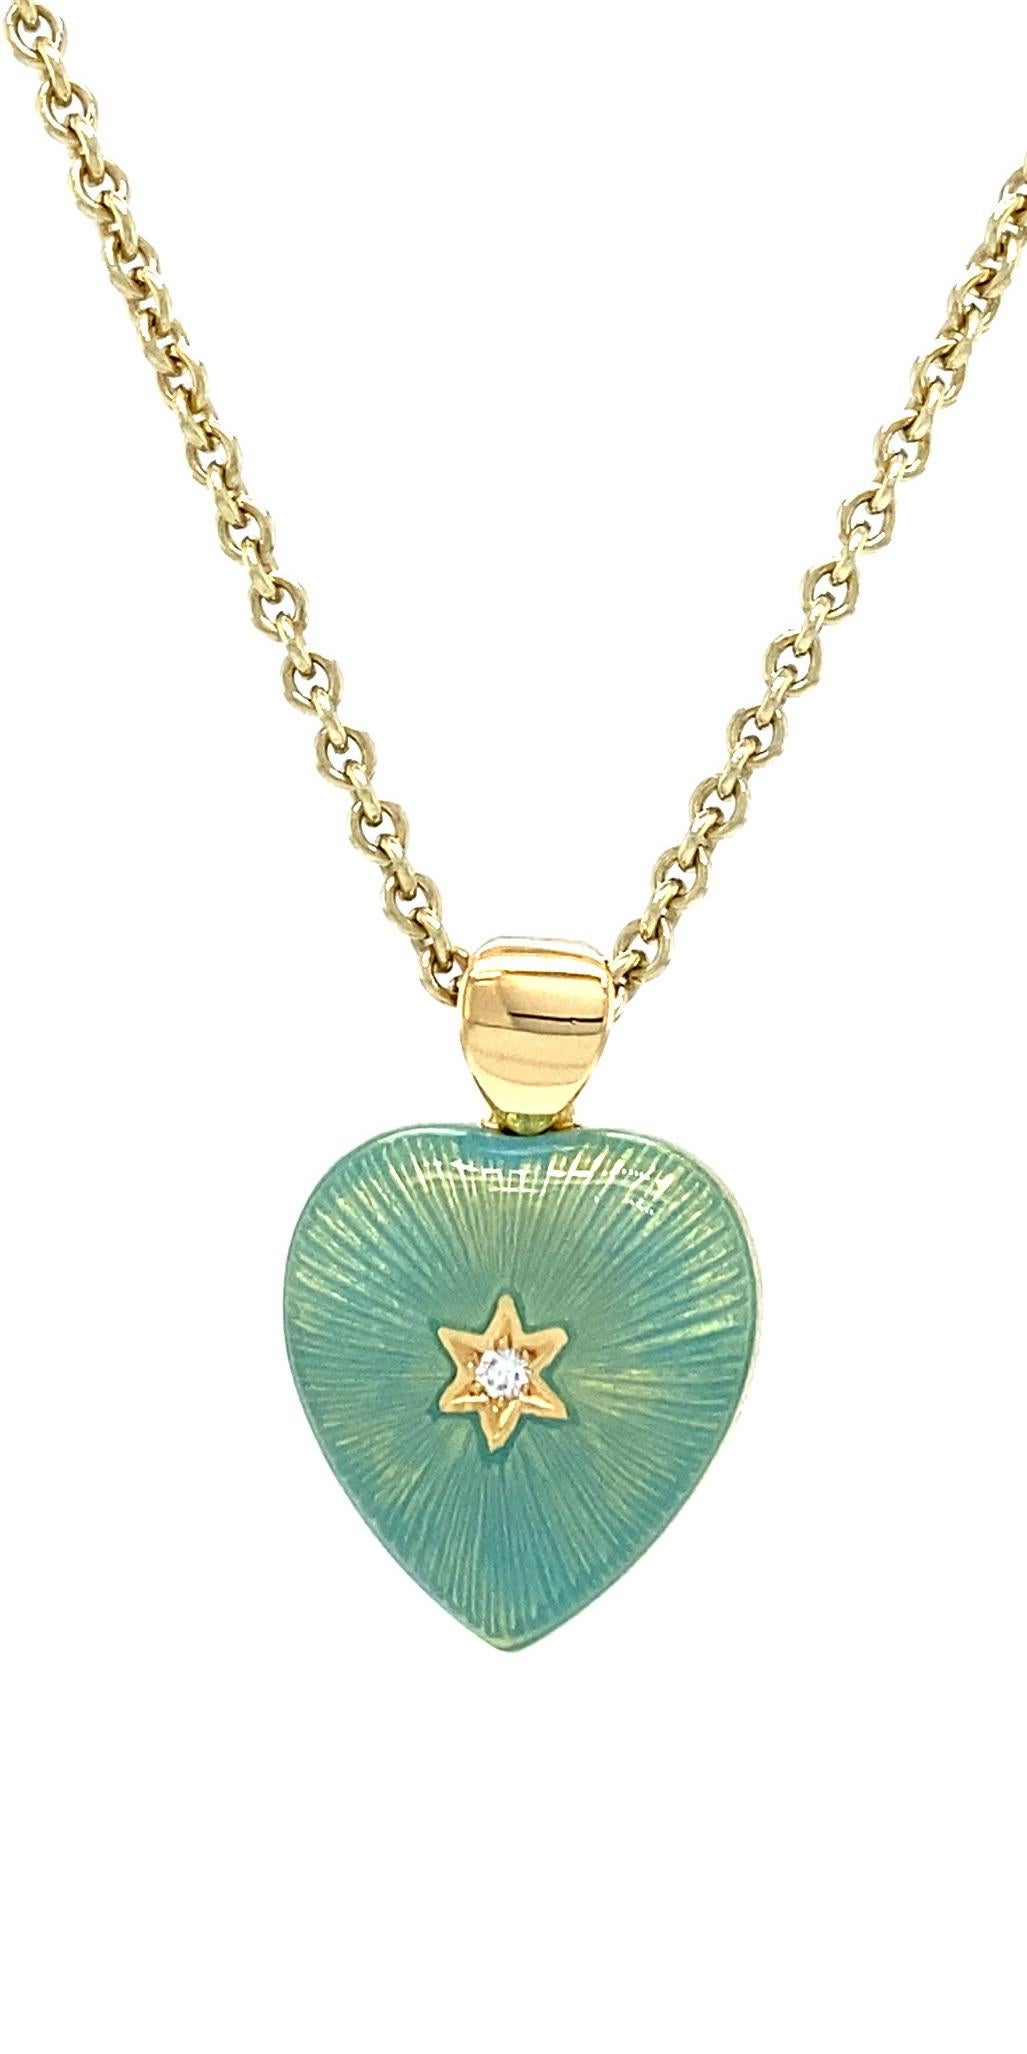 Victor Mayer heart shaped two colored pendant necklace 18k yellow gold, light turquoise and yellow vitreous enamel, 2 diamonds, total 2.02 ct, G VS, measurements app. 11.8 mm x 13.0 mm

About the creator Victor Mayer
Victor Mayer is internationally